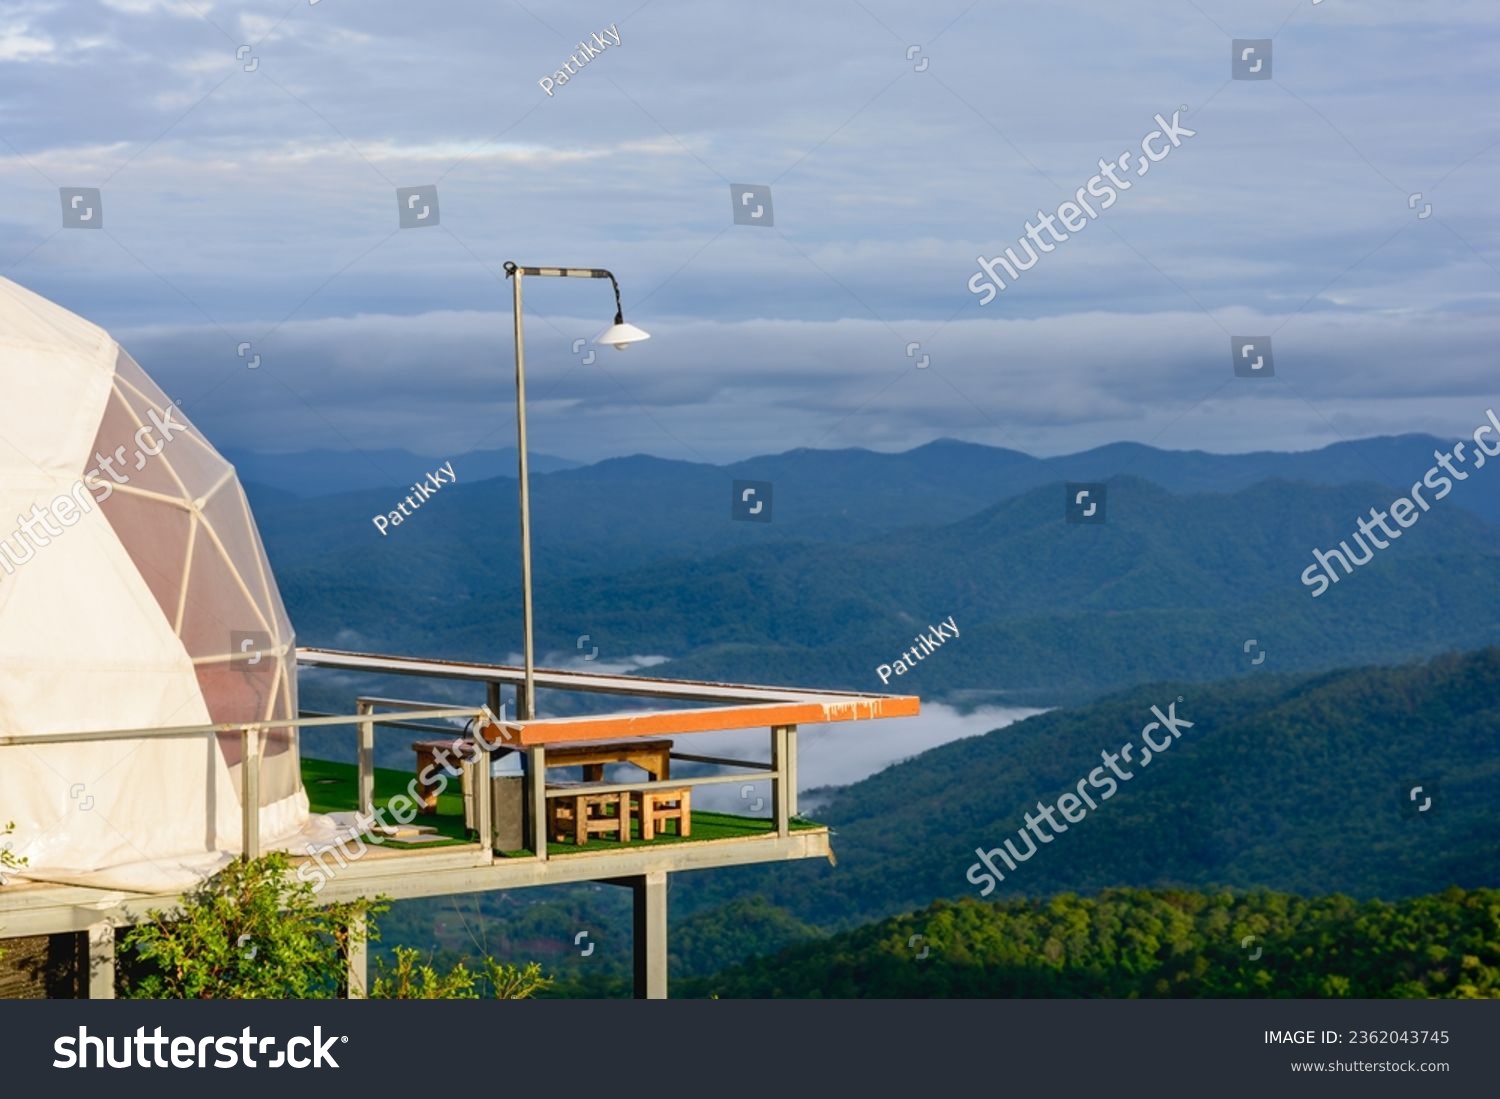 Dome tent for camping and beautiful landscape on hill in rainy season at Mon Jam, Chiang Mai, Thailand. Geo dome tents. Outdoors cabin.Cozy, camping, glamping, holiday, vacation lifestyle concept. #2362043745